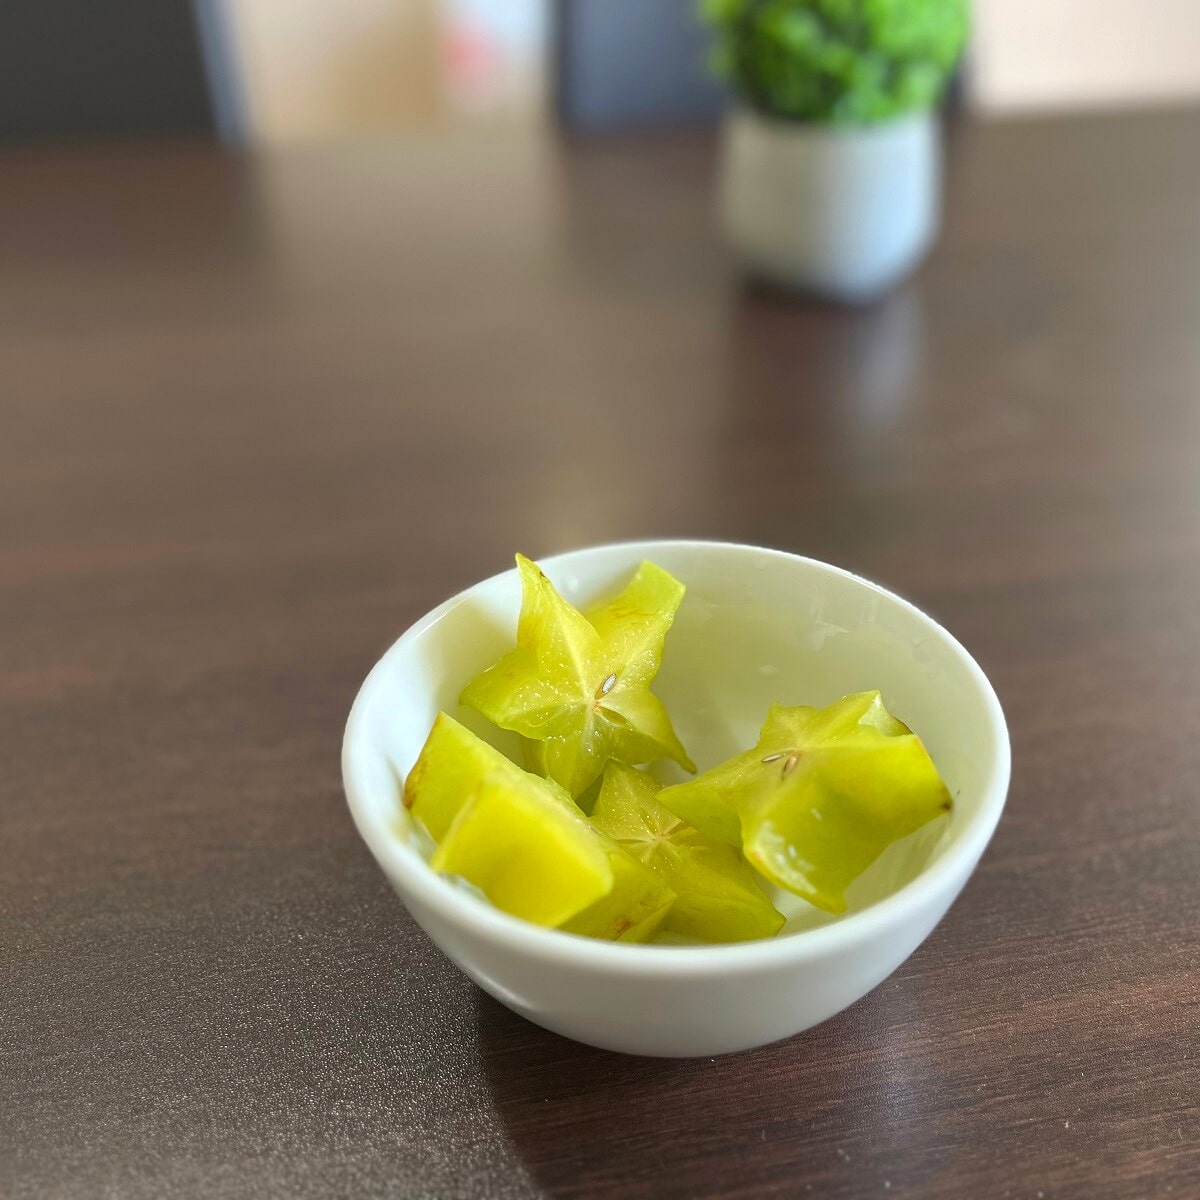 Star fruit (also known as carambola)